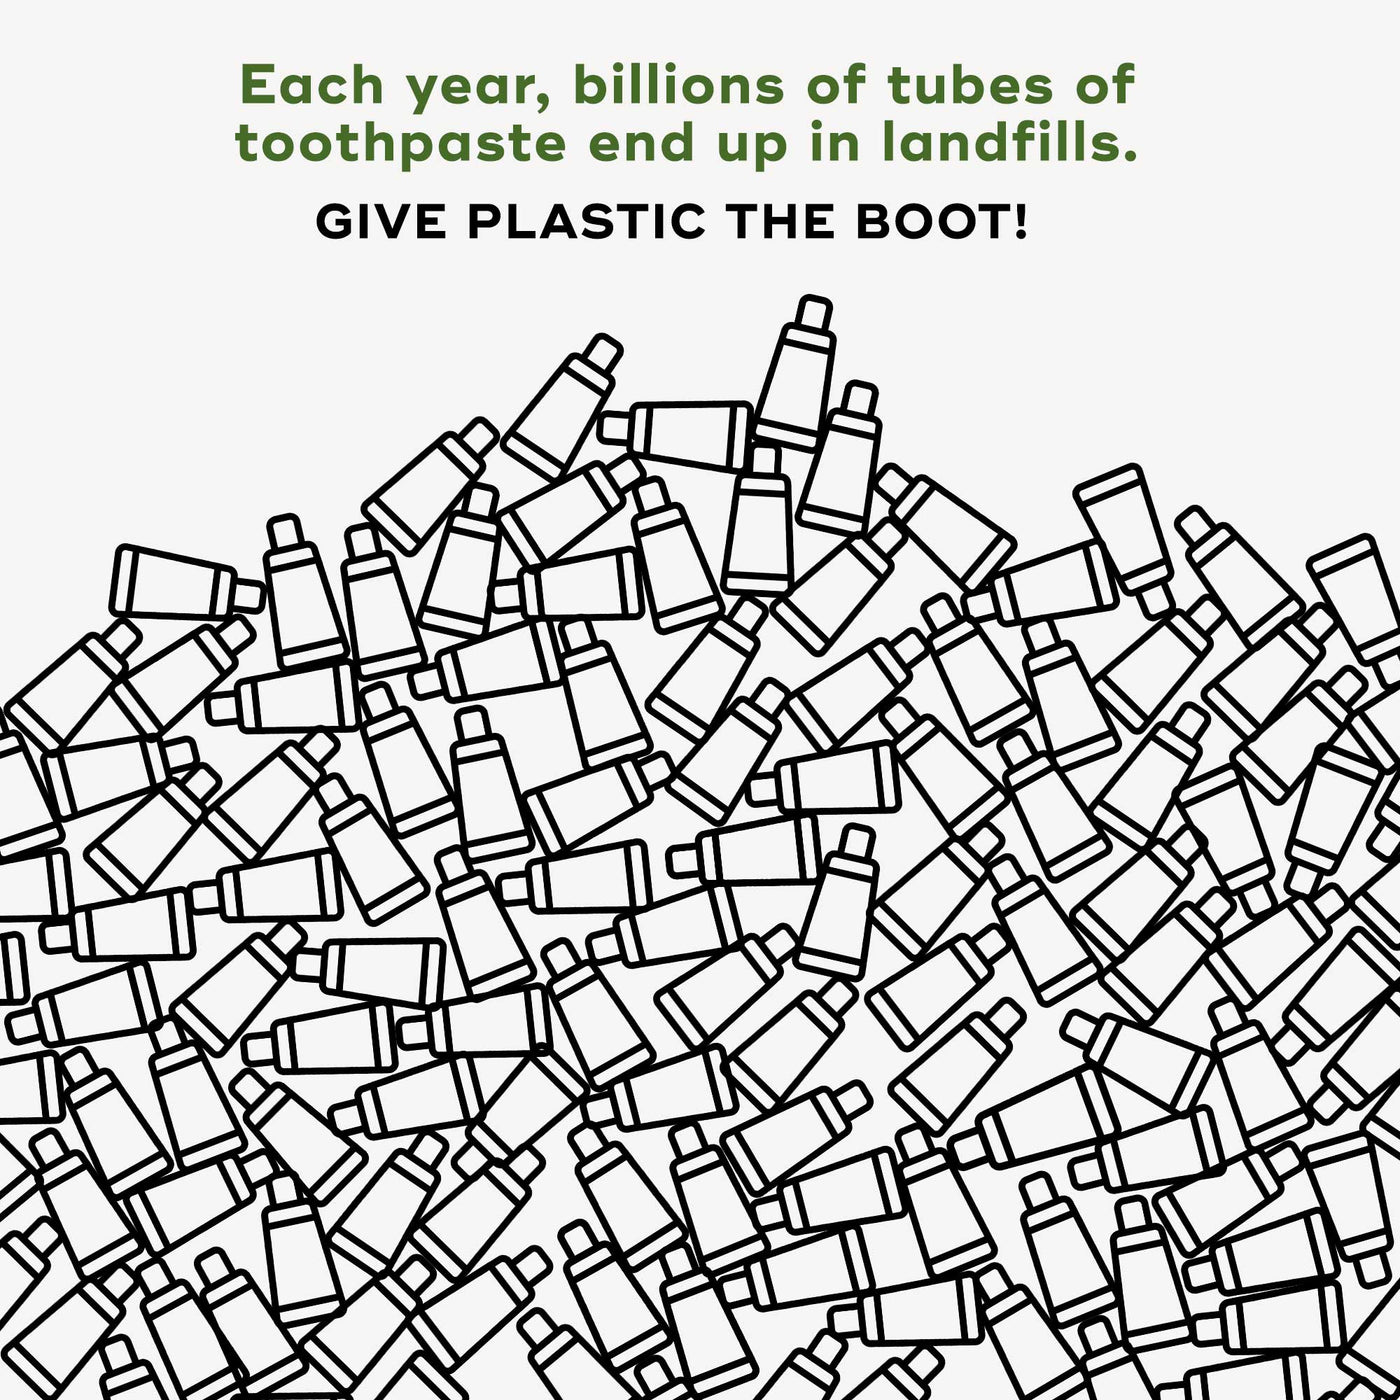 Each year, billion tubes of toothpaste end up in landfills. Give plastic the boot!